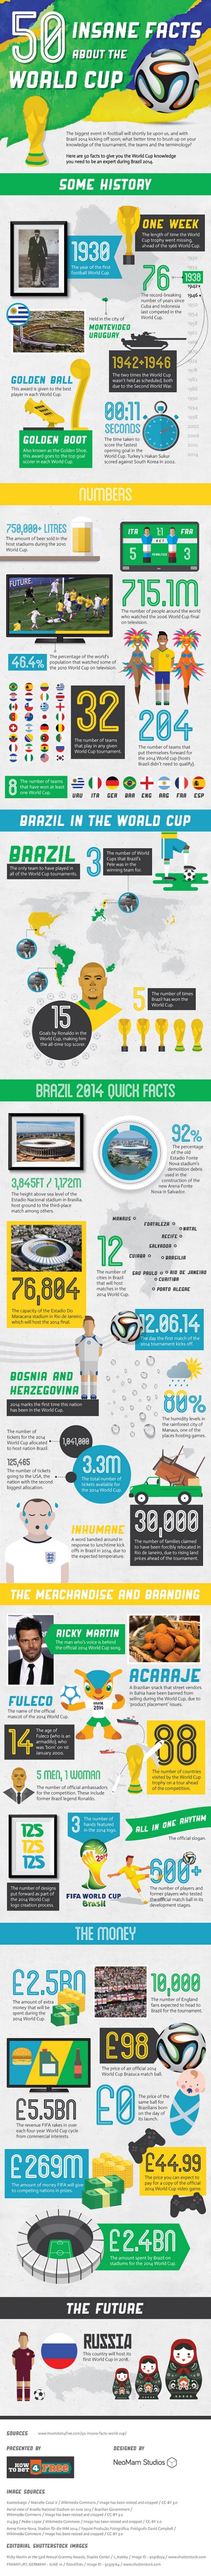 50-facts-about-the-world-cup